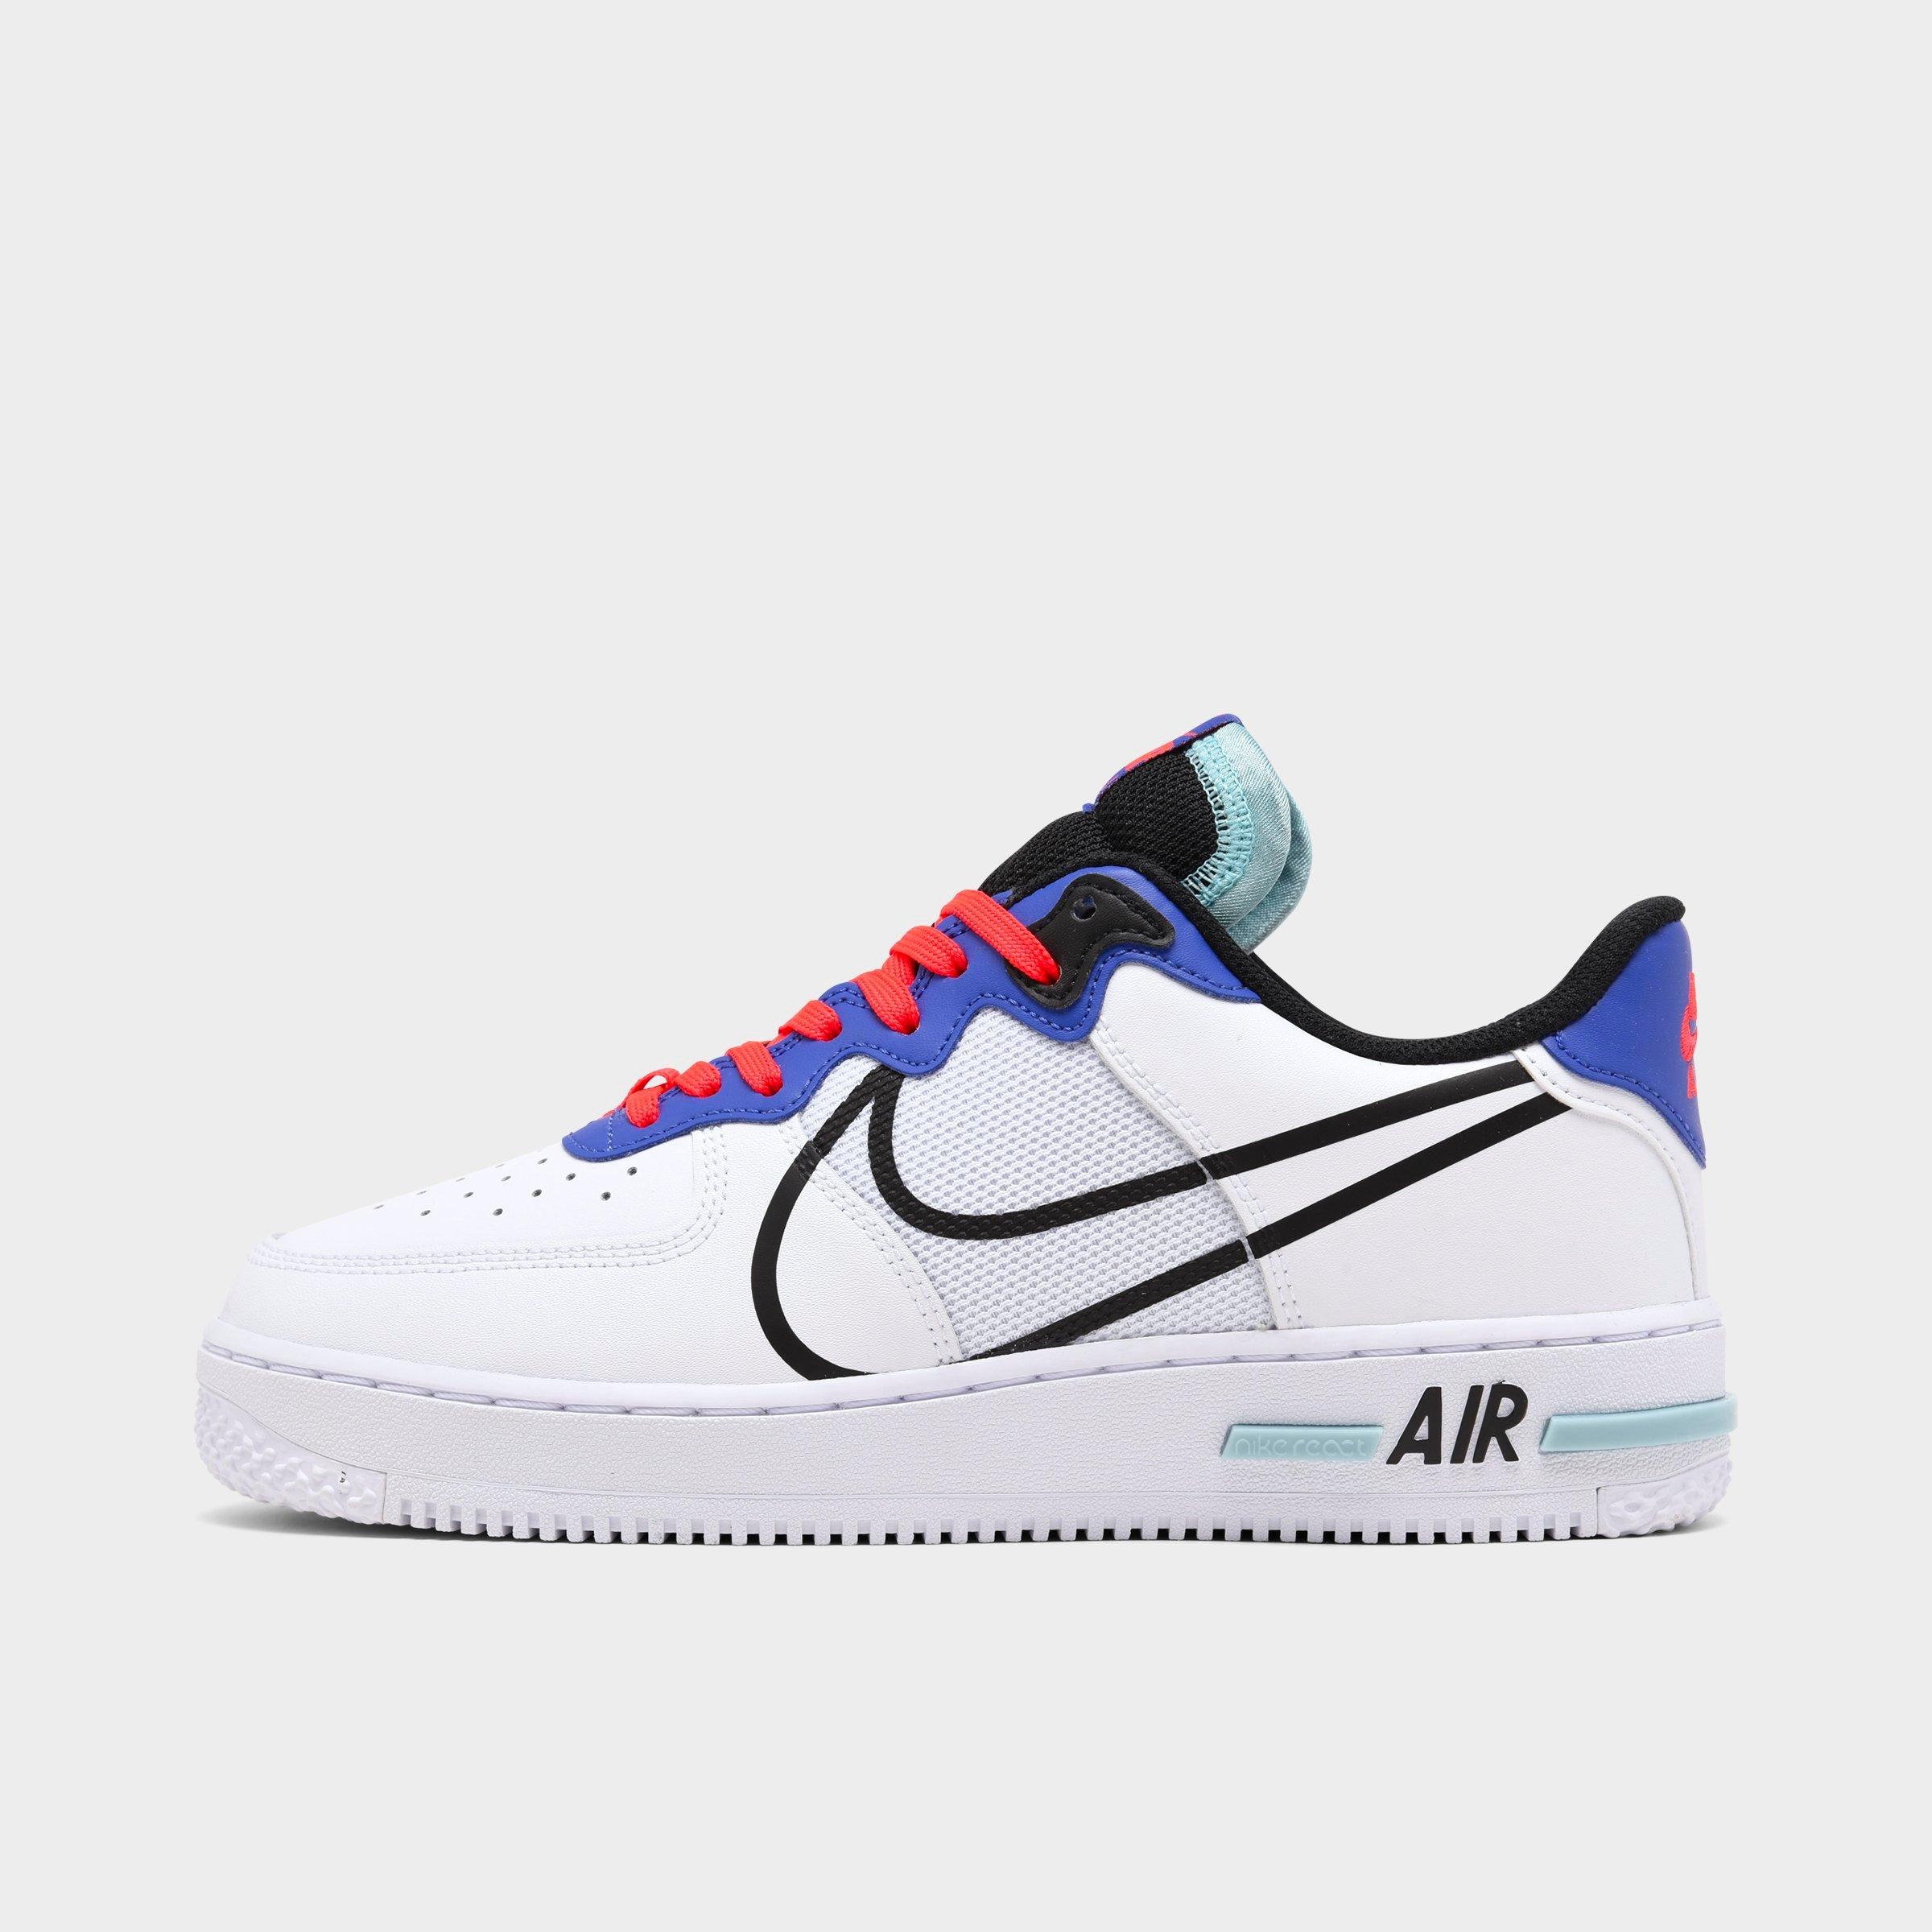 air force one shoes finish line